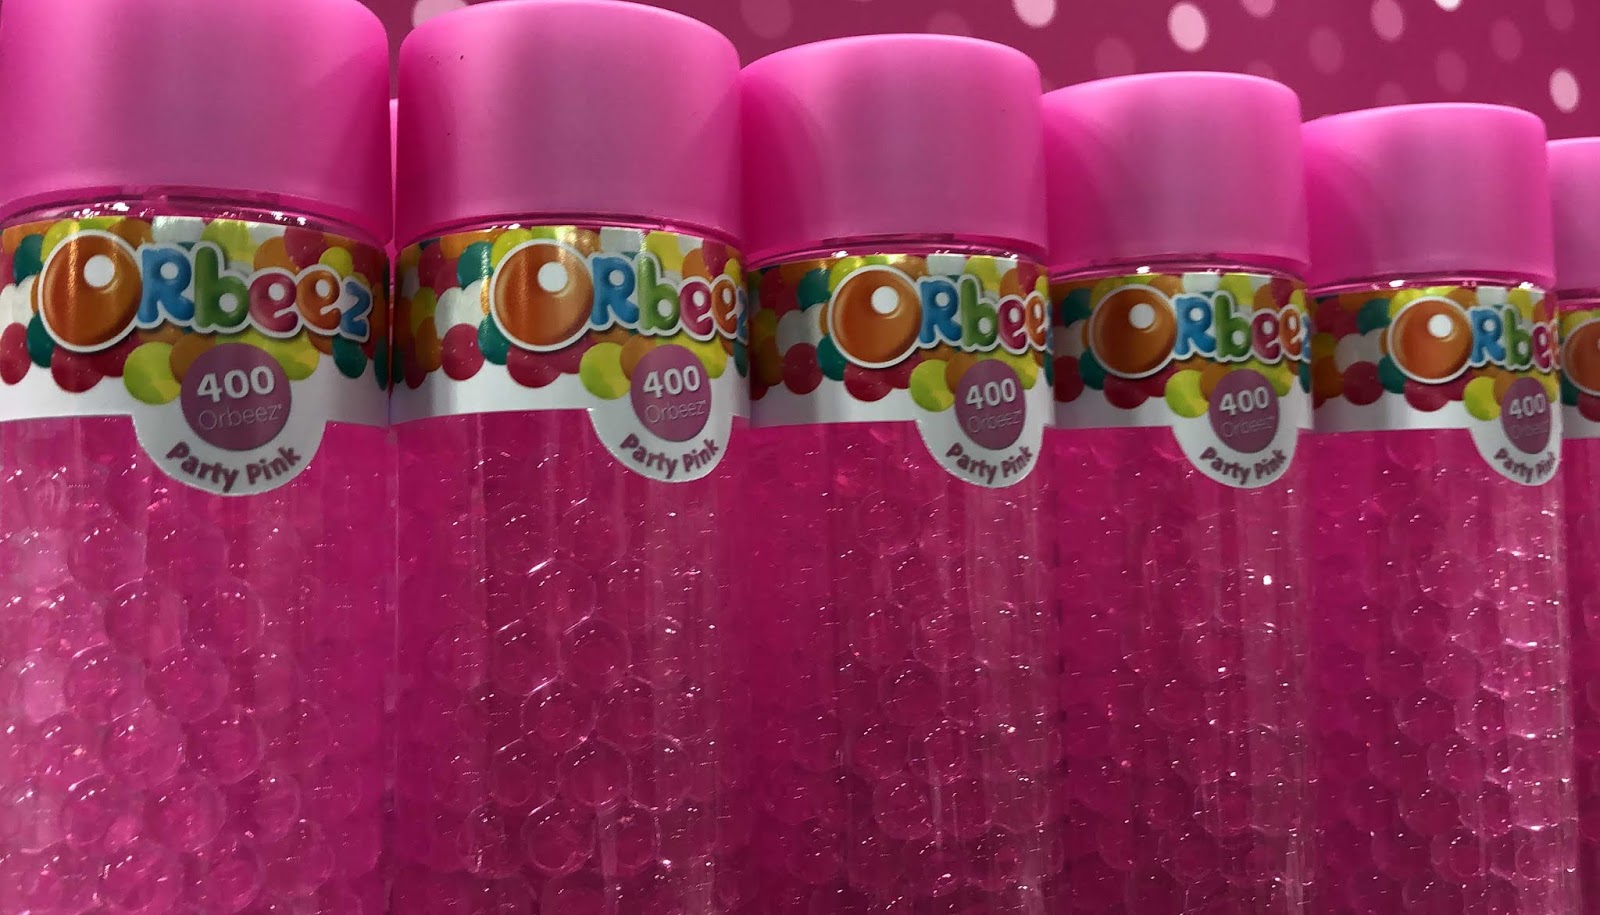 Exclusive: Maya Toys Celebrates 10 Years of Orbeez with New